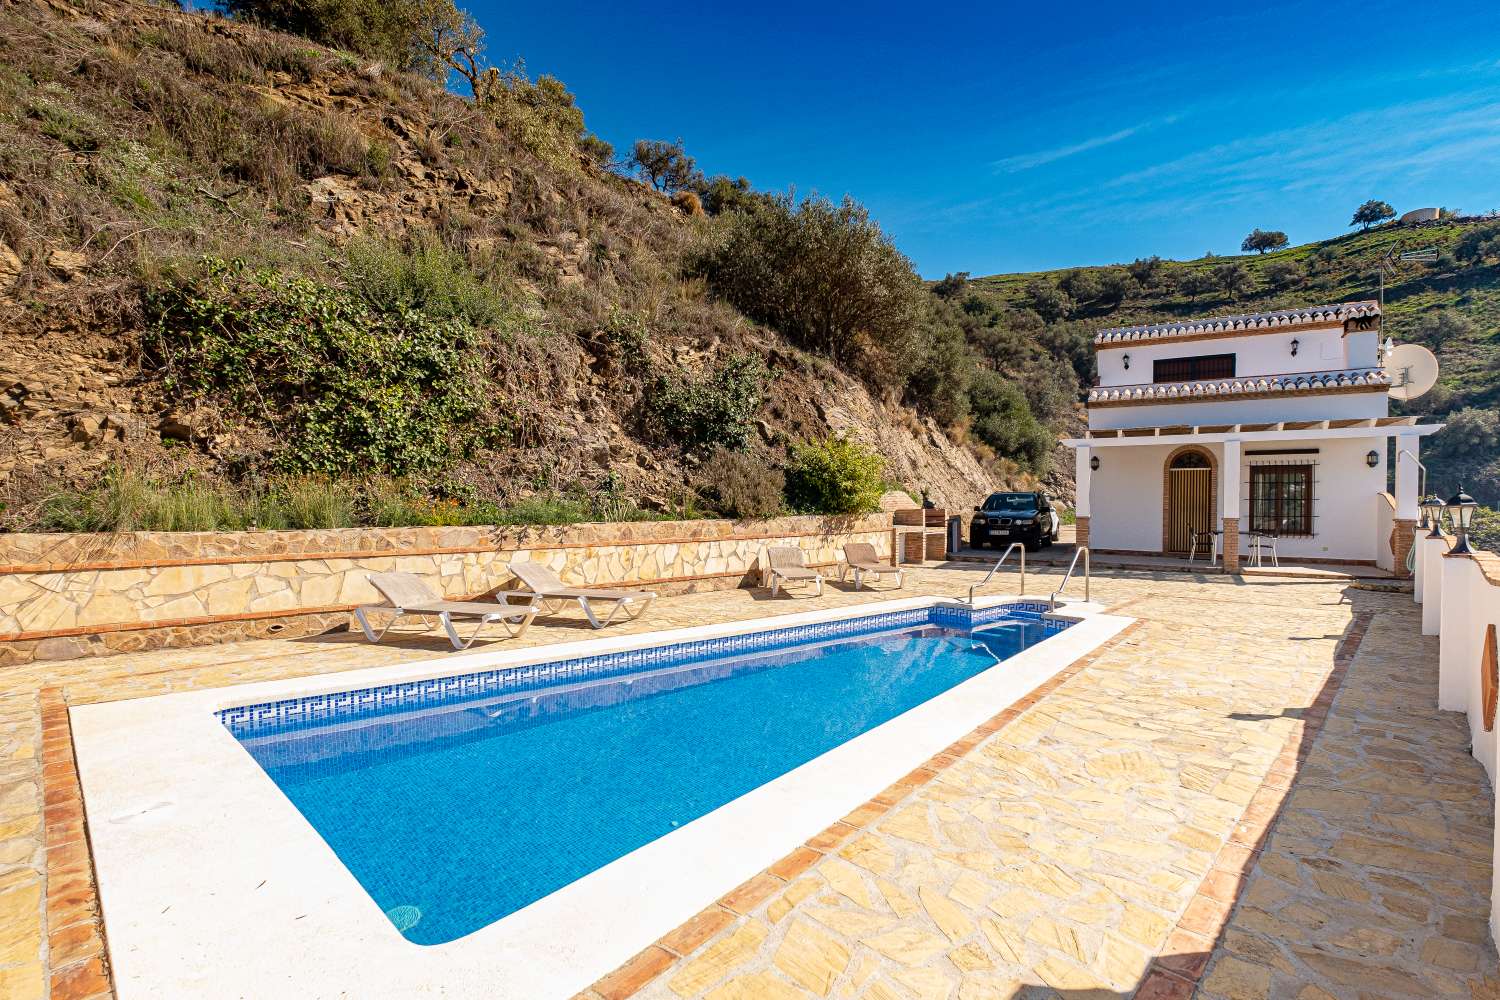 Beautiful country house between Frigiliana and Torrox, in the Hotel Los Caracoles area